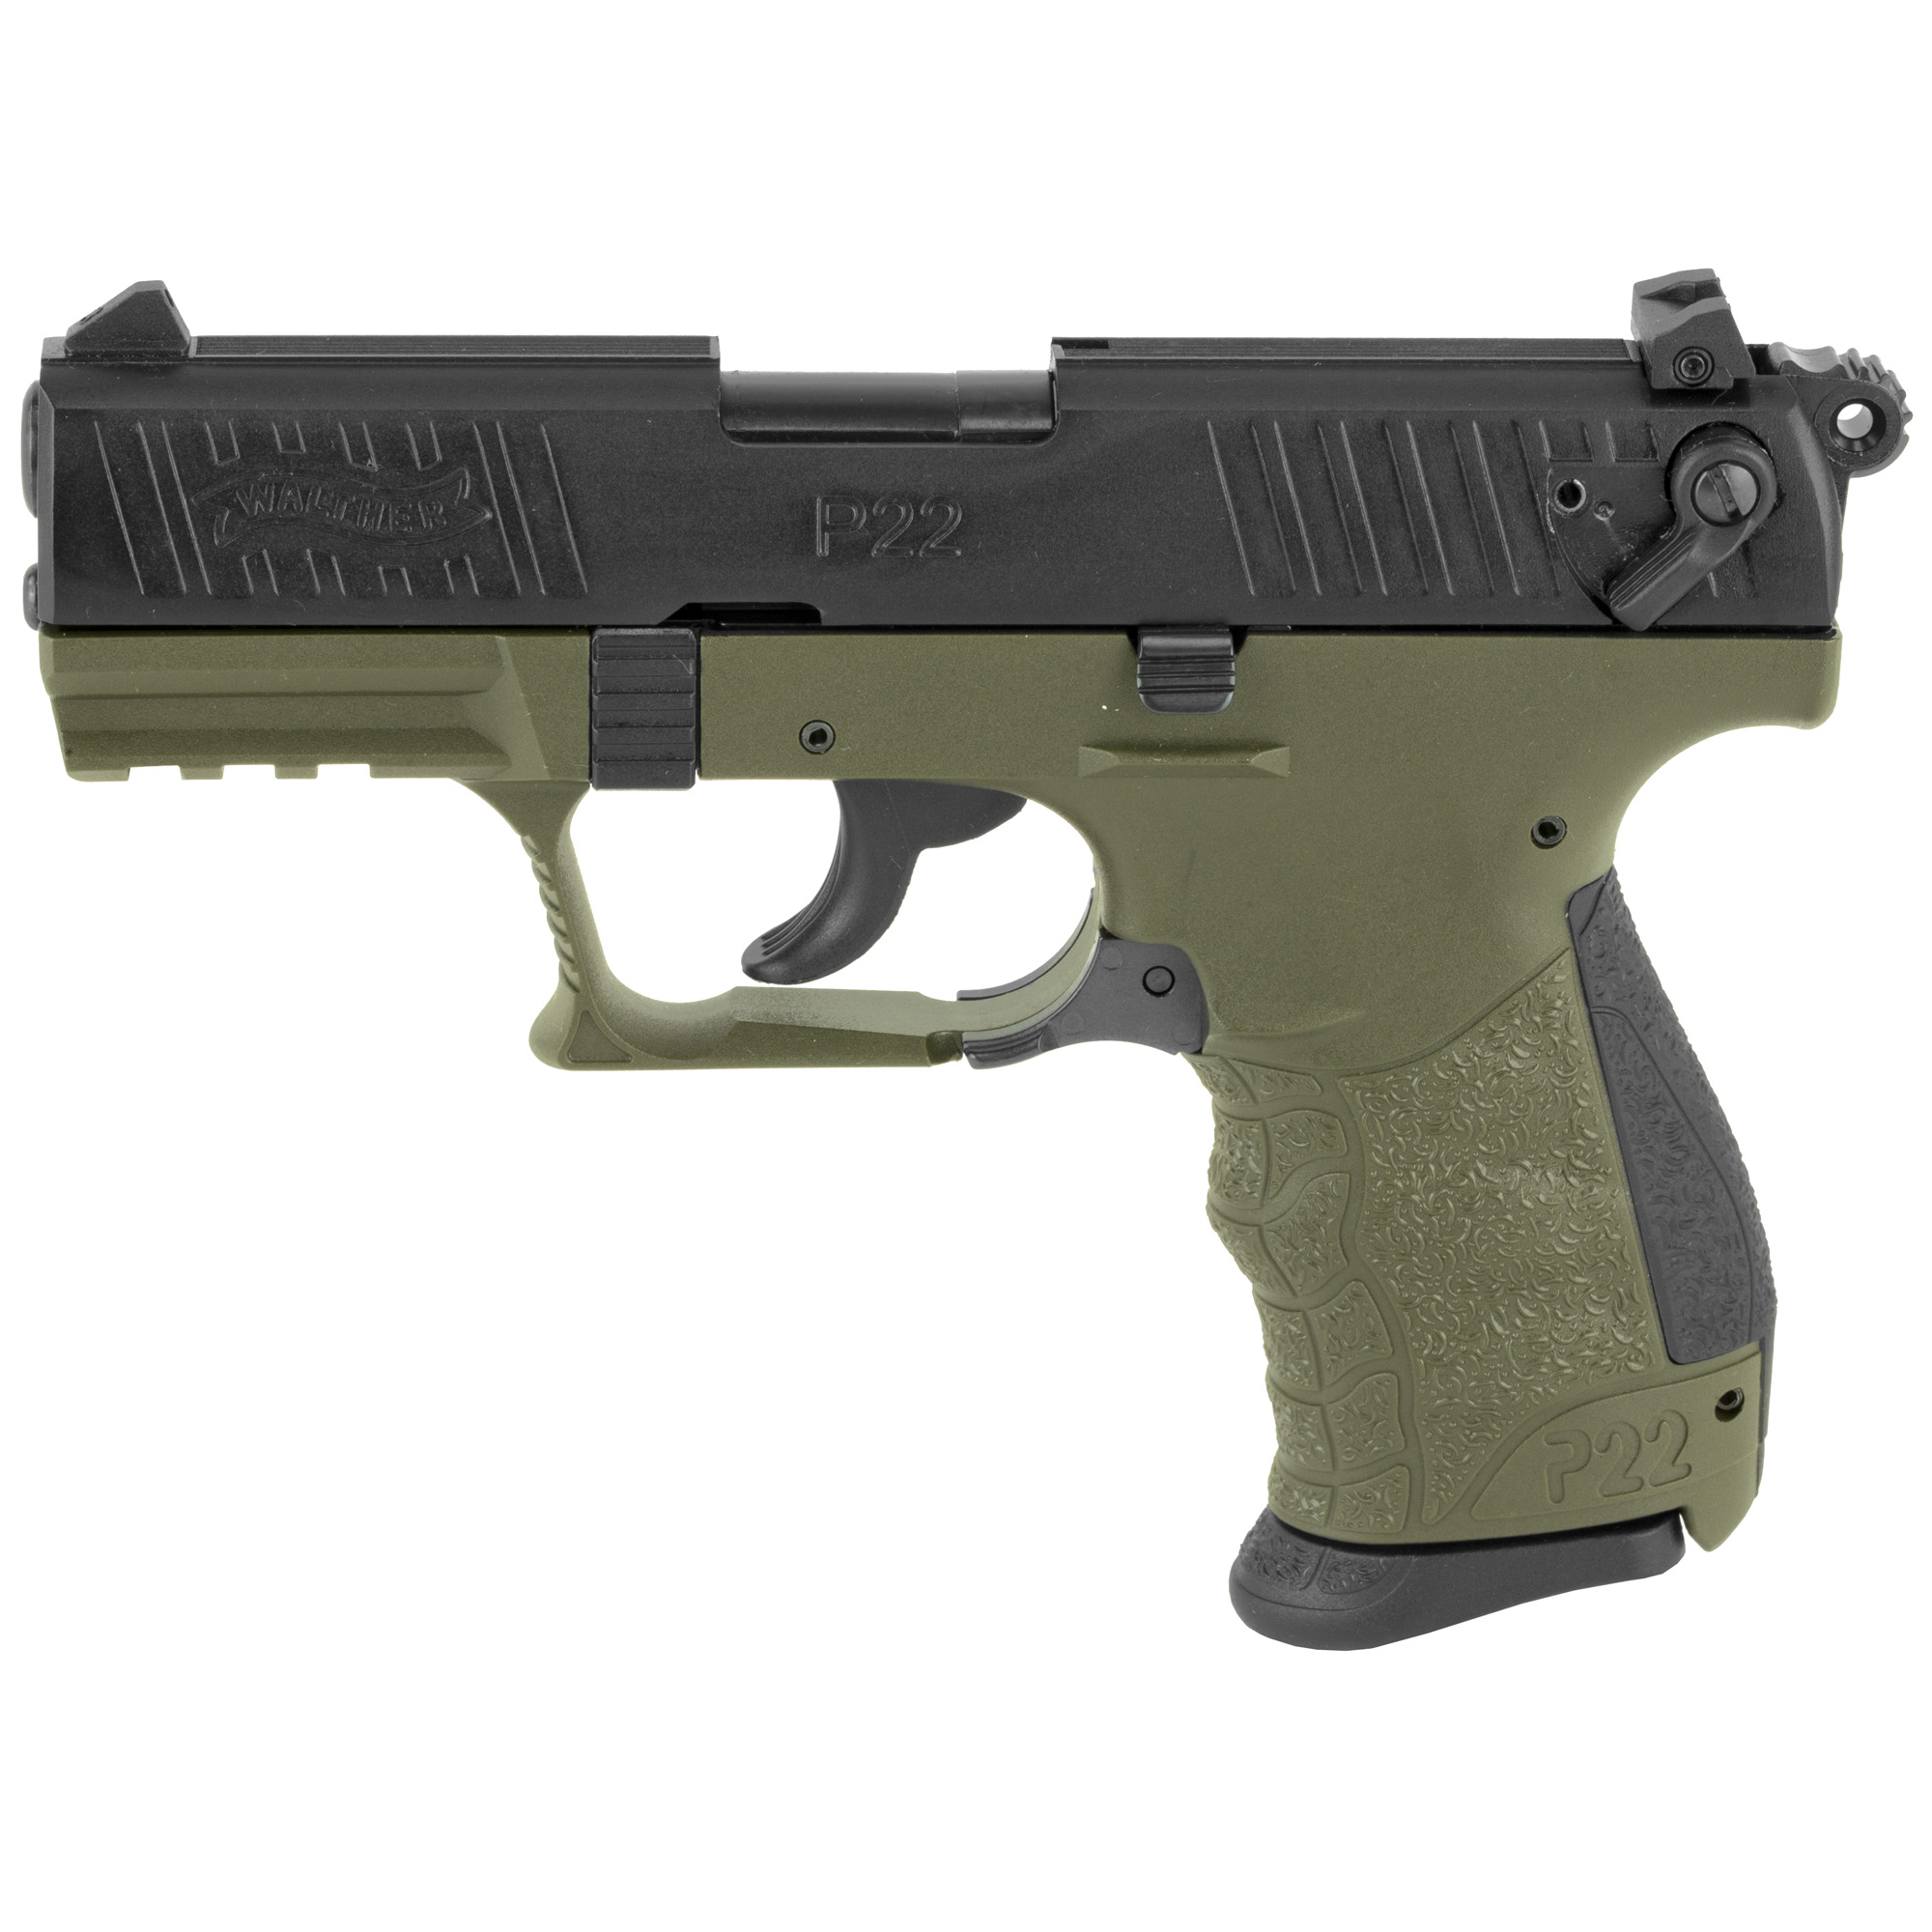 WALTHER P22Q 22LR 3.42 10RD MLTRY GRN